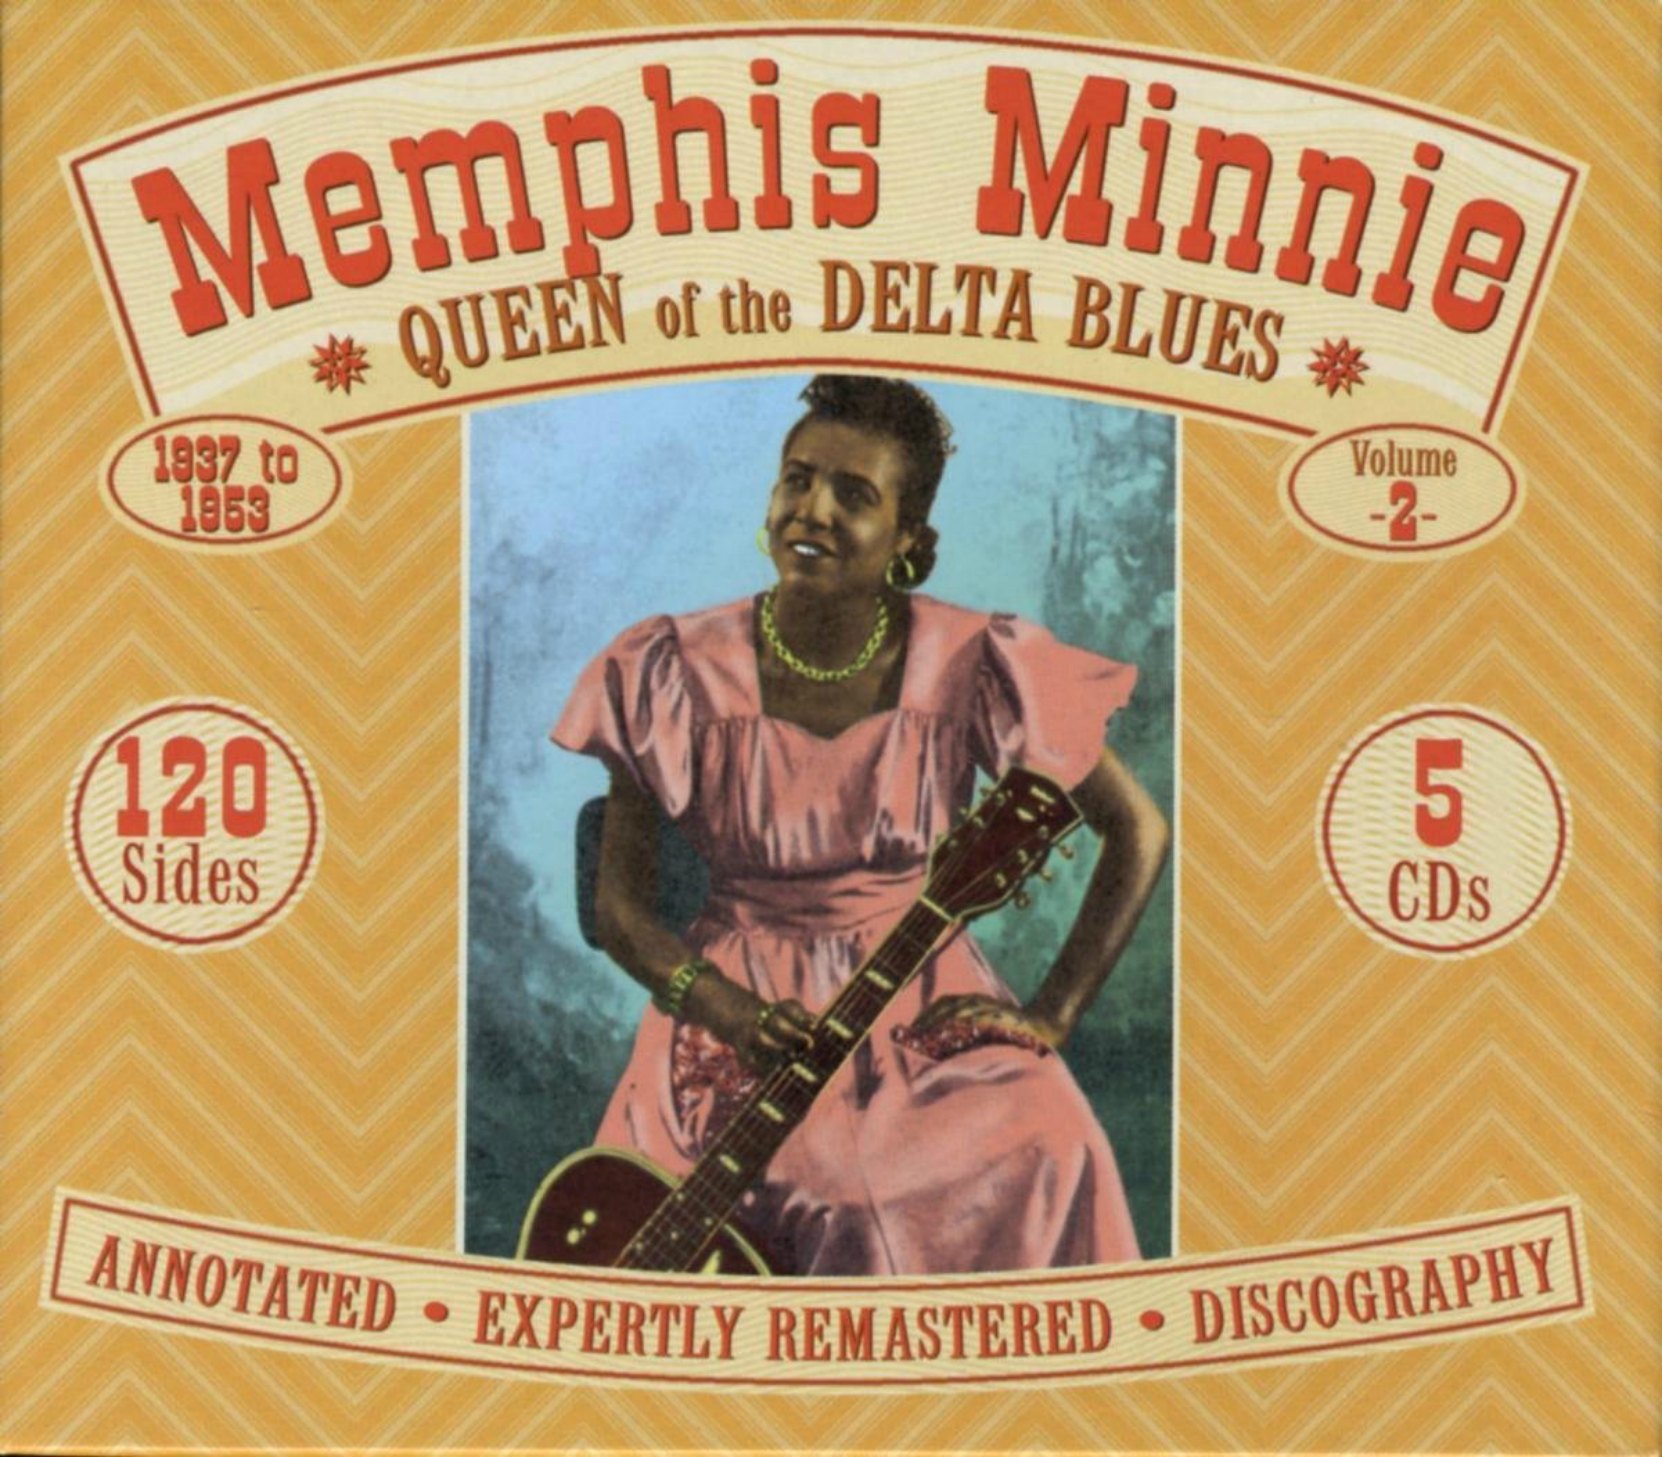 CD cover, Memphis Minnie - Queen of the Delta Blues 1937-1953, 5 CD set on JSP Records. Volume 2 of a 2 volume collection of memphis Minnie recordings.